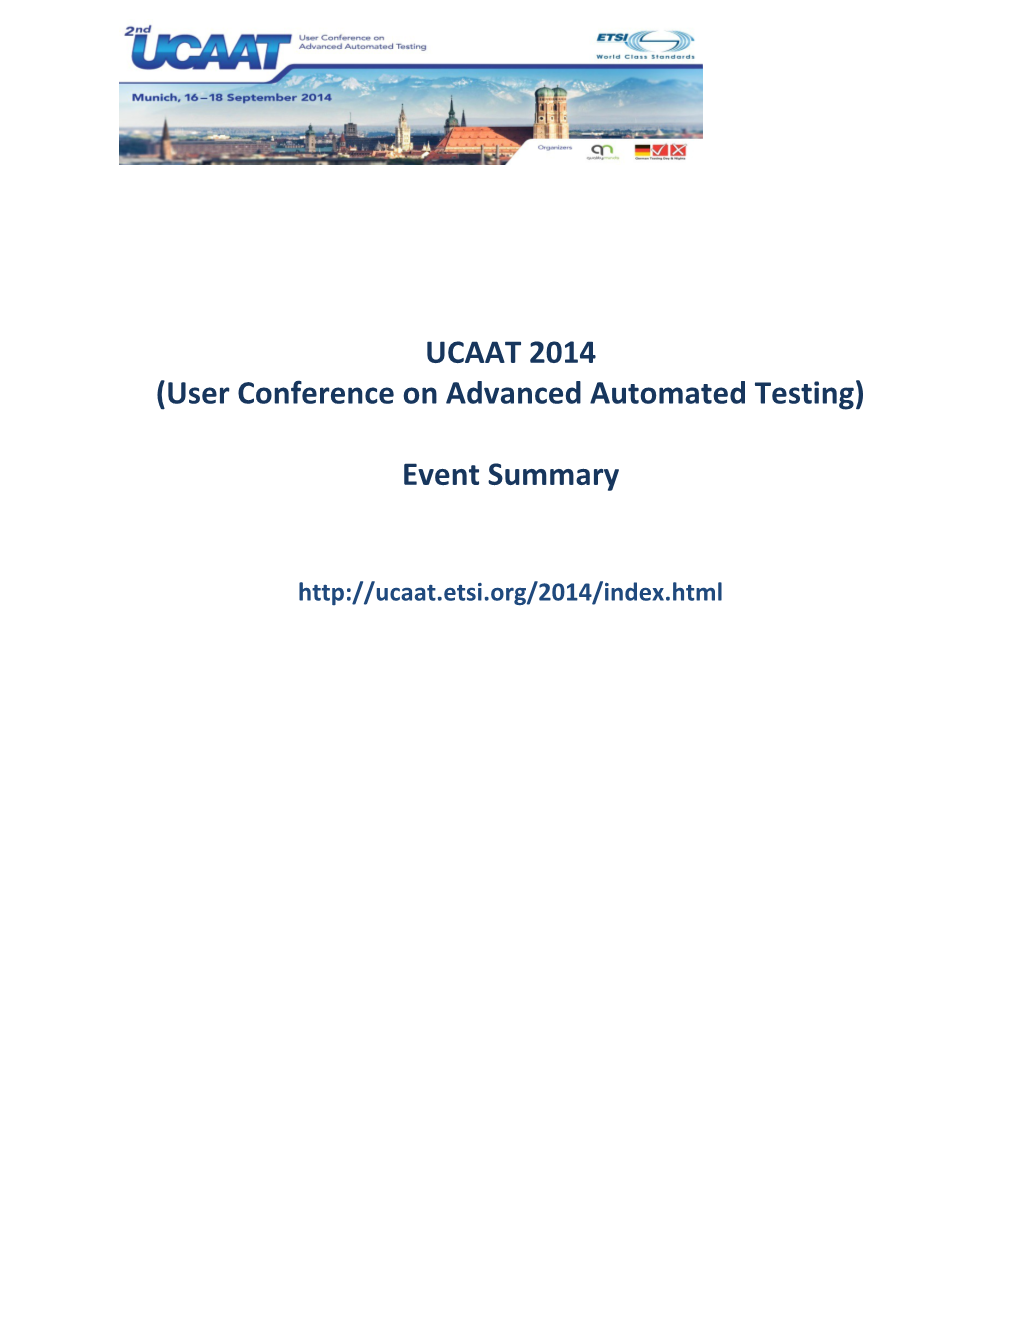 (User Conference on Advanced Automated Testing) Event Summary